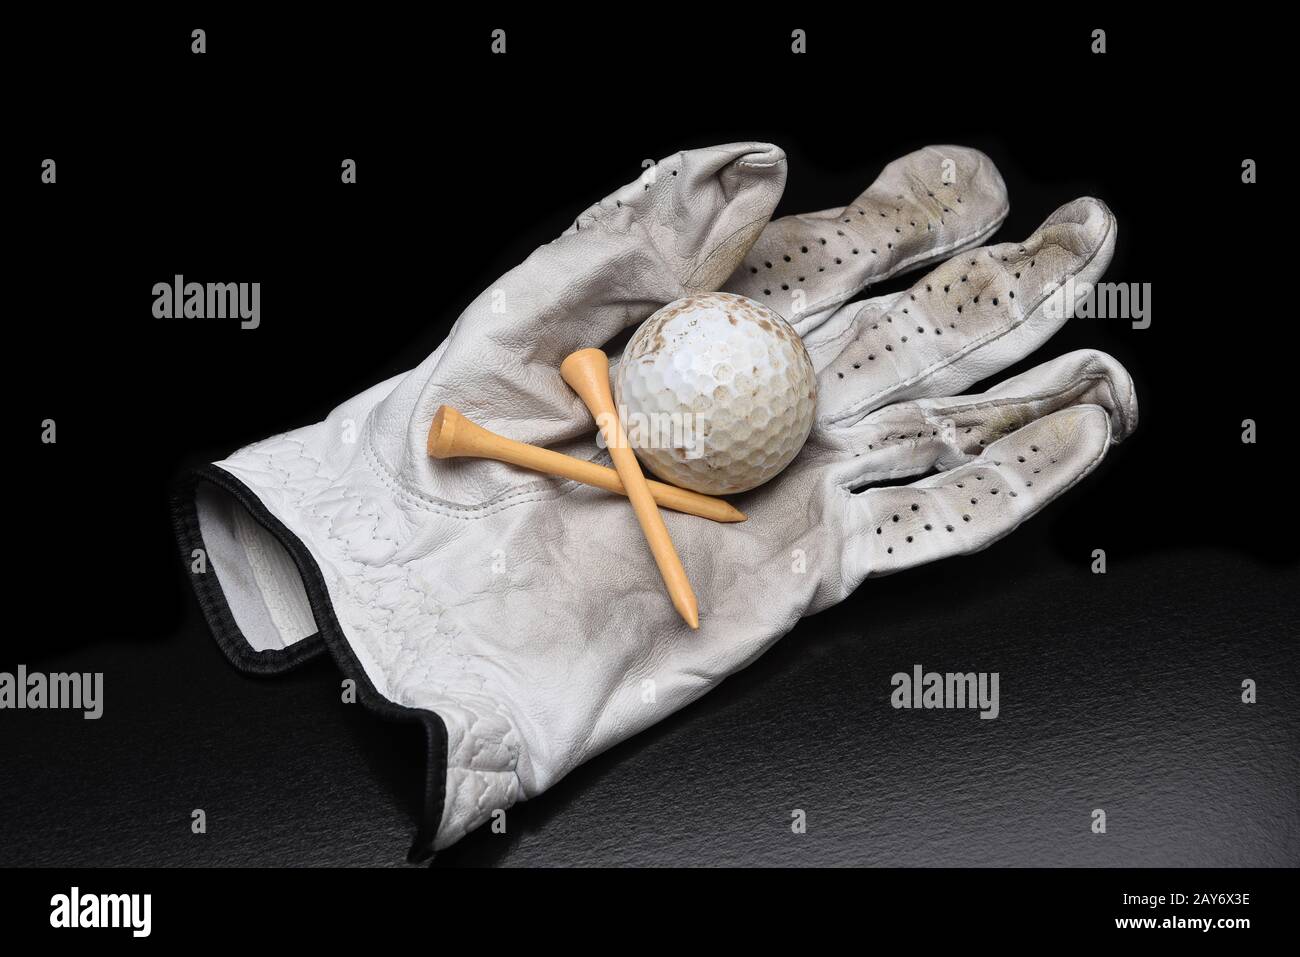 Golf Still Life. A used golf glove with tees and a dirty golf ball on black with copy space. Stock Photo